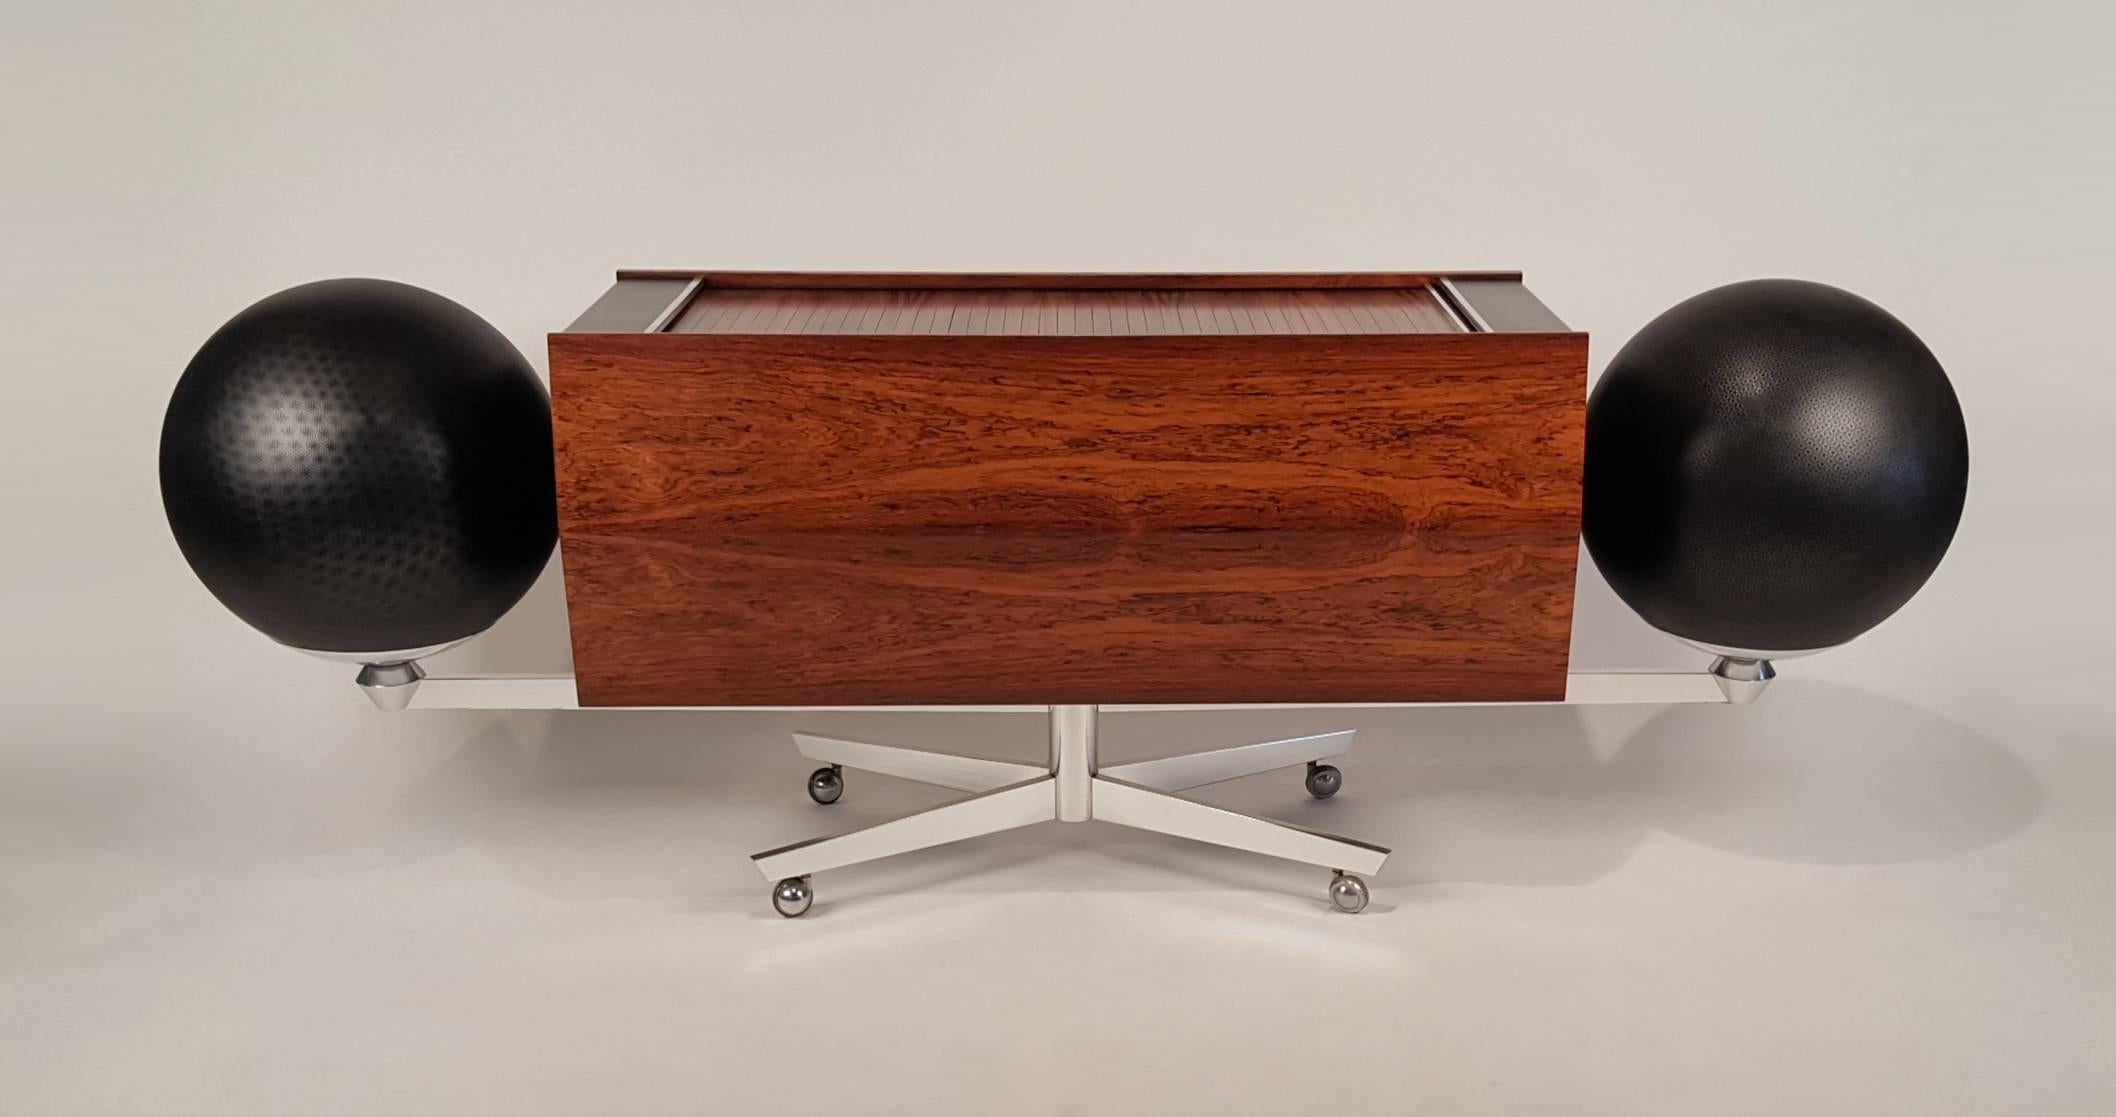 "Project G epitomized high design, pure form, the perfection of how sacred platonic geometry can bring our banal, everyday products to a higher spiritual art form. It set the trend for stereo equipment to become a composition of extreme pure